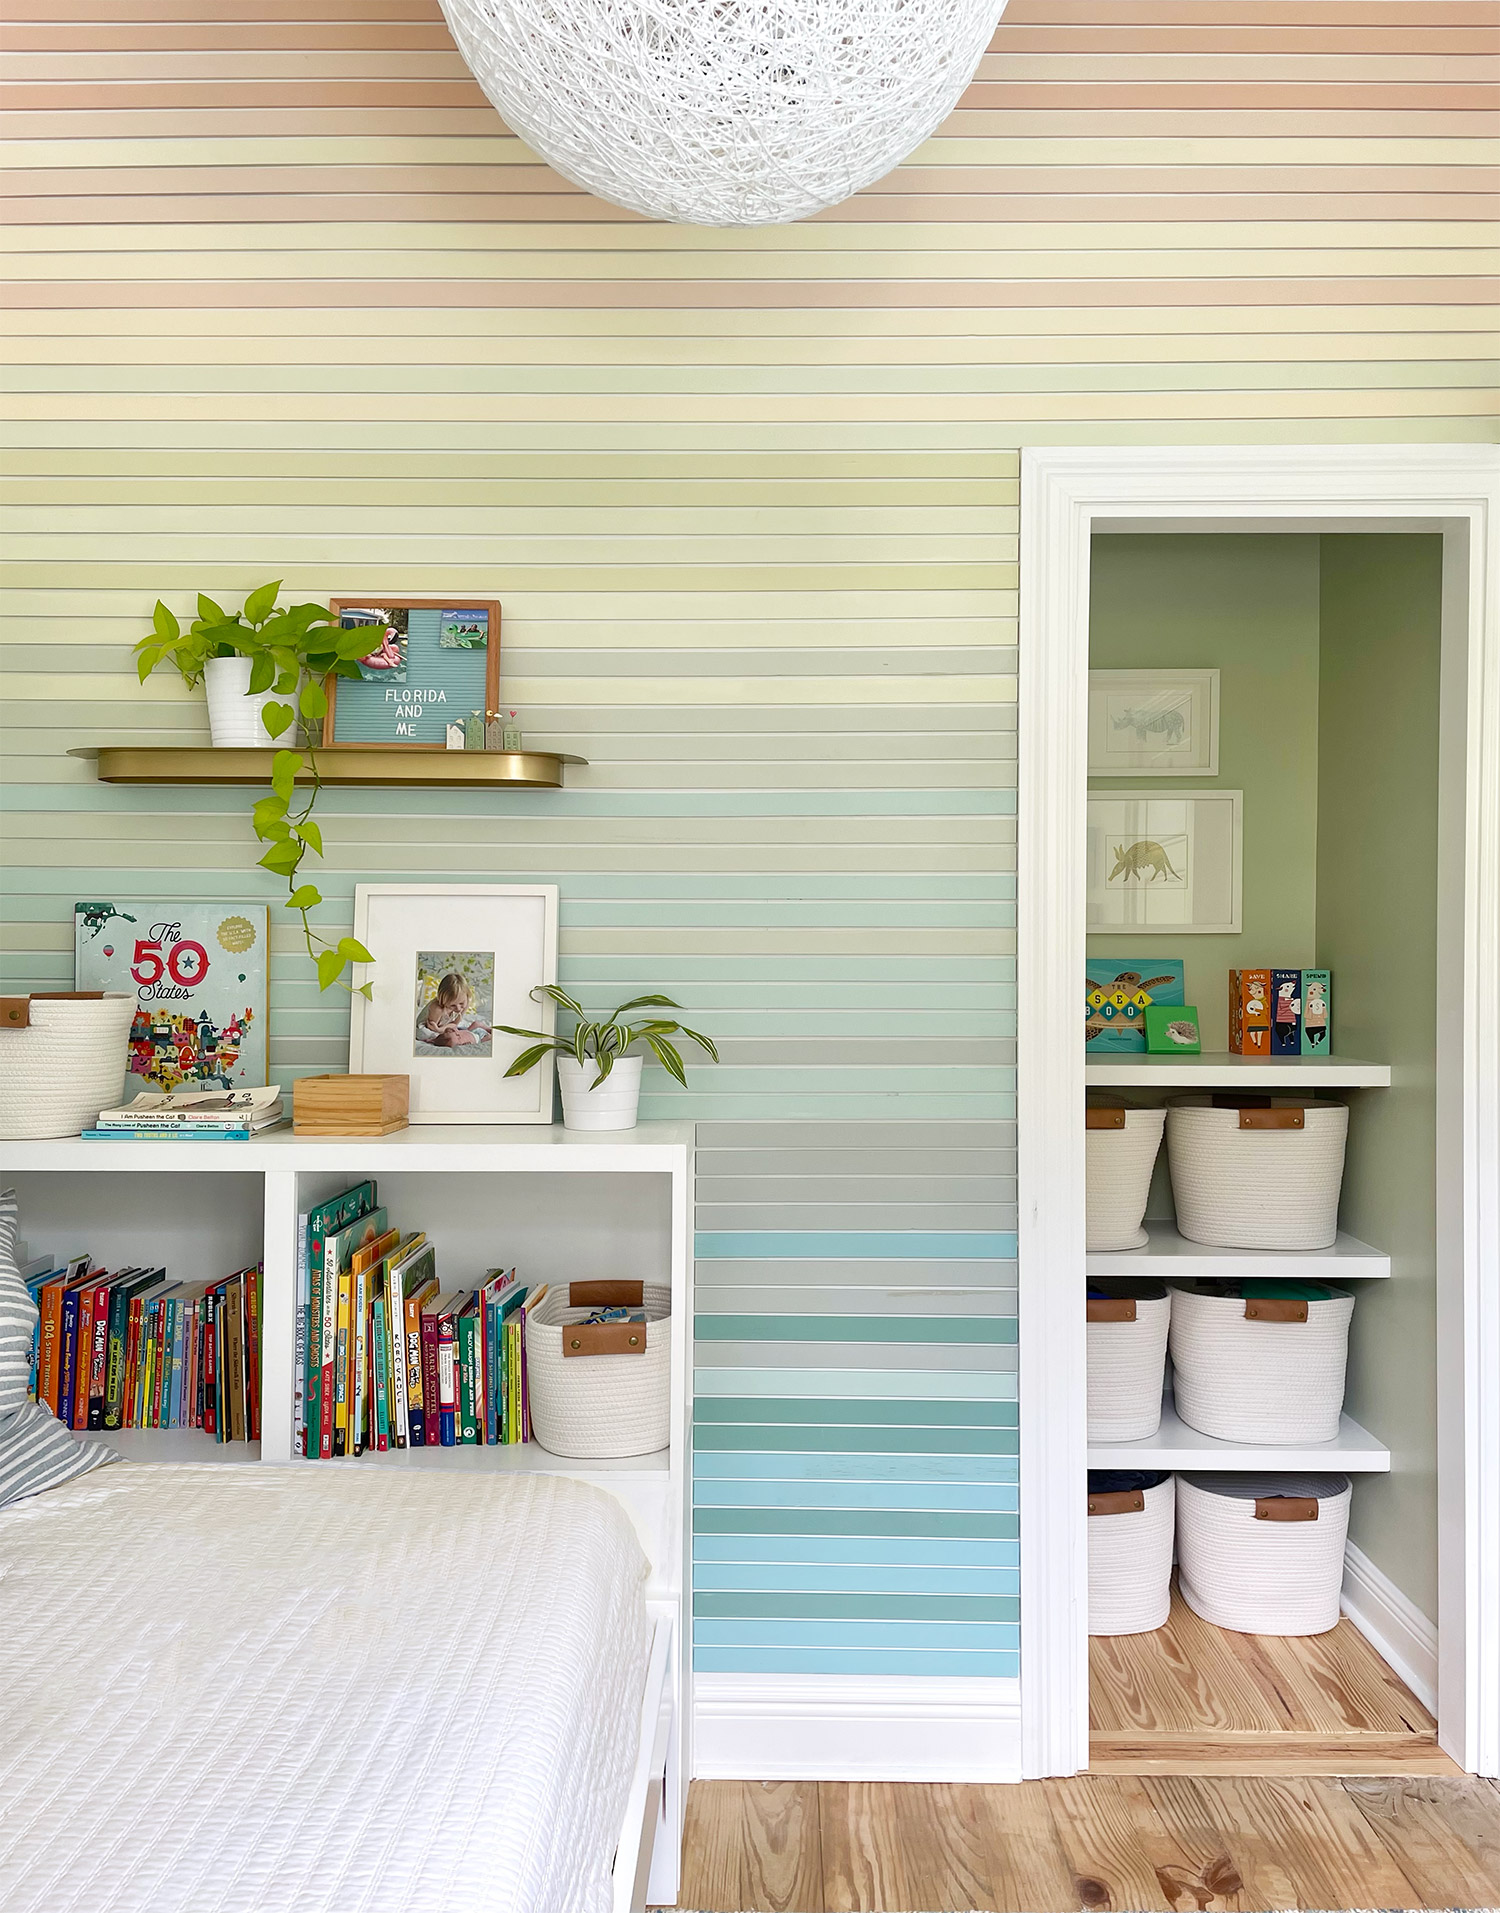 Boys bedroom with colorful planked wall treatment and built-in DIY bedside bookshelf